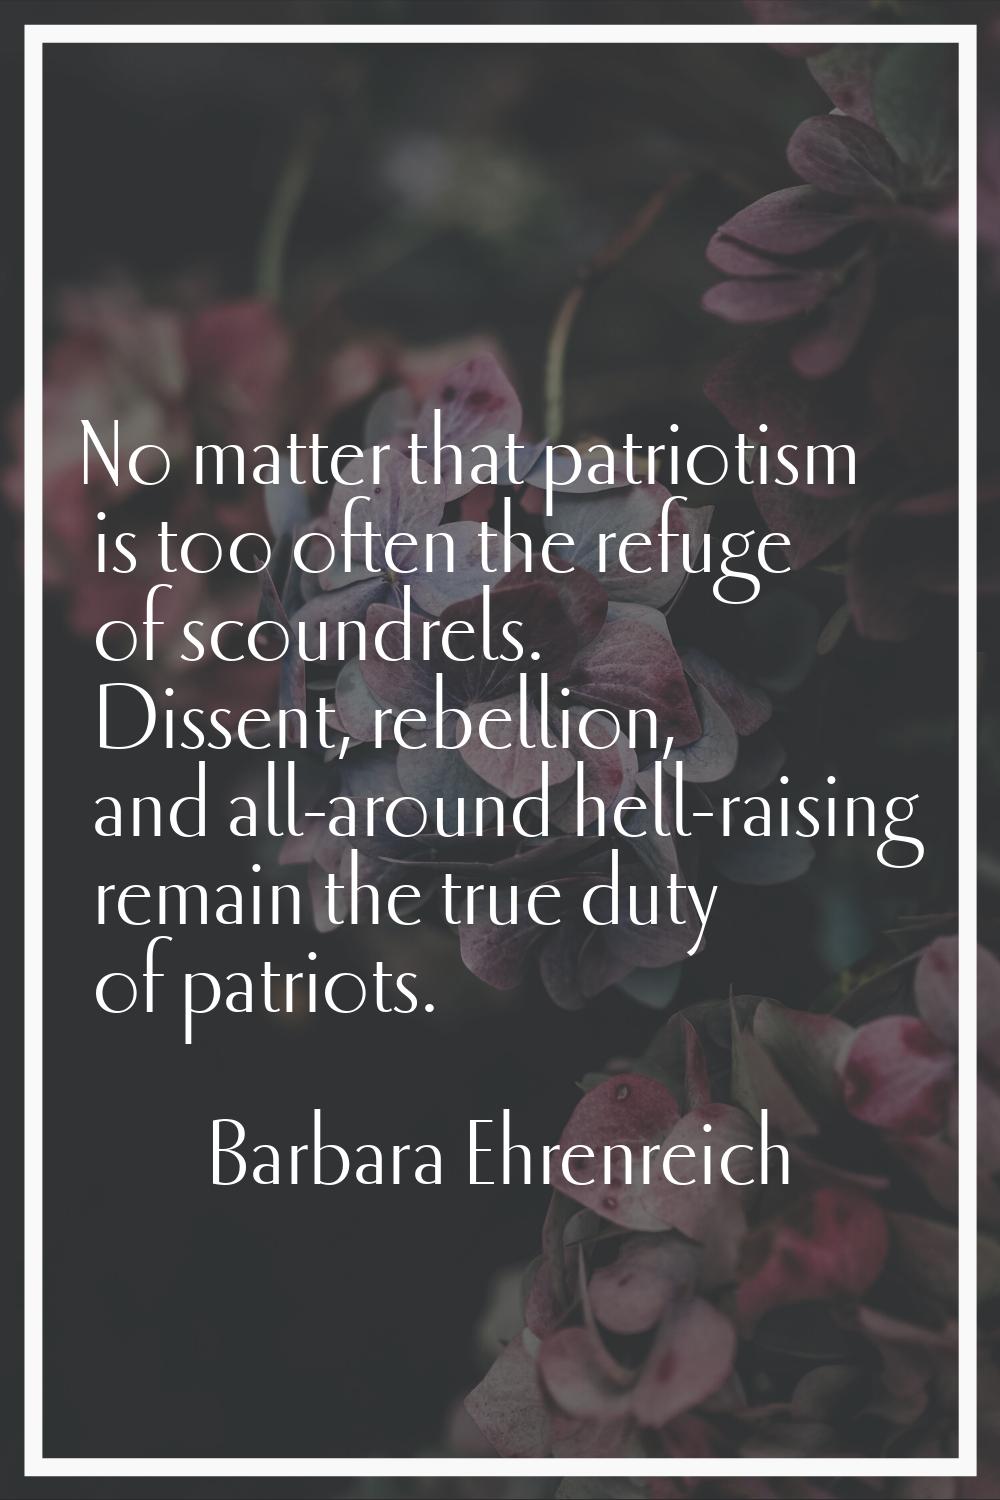 No matter that patriotism is too often the refuge of scoundrels. Dissent, rebellion, and all-around